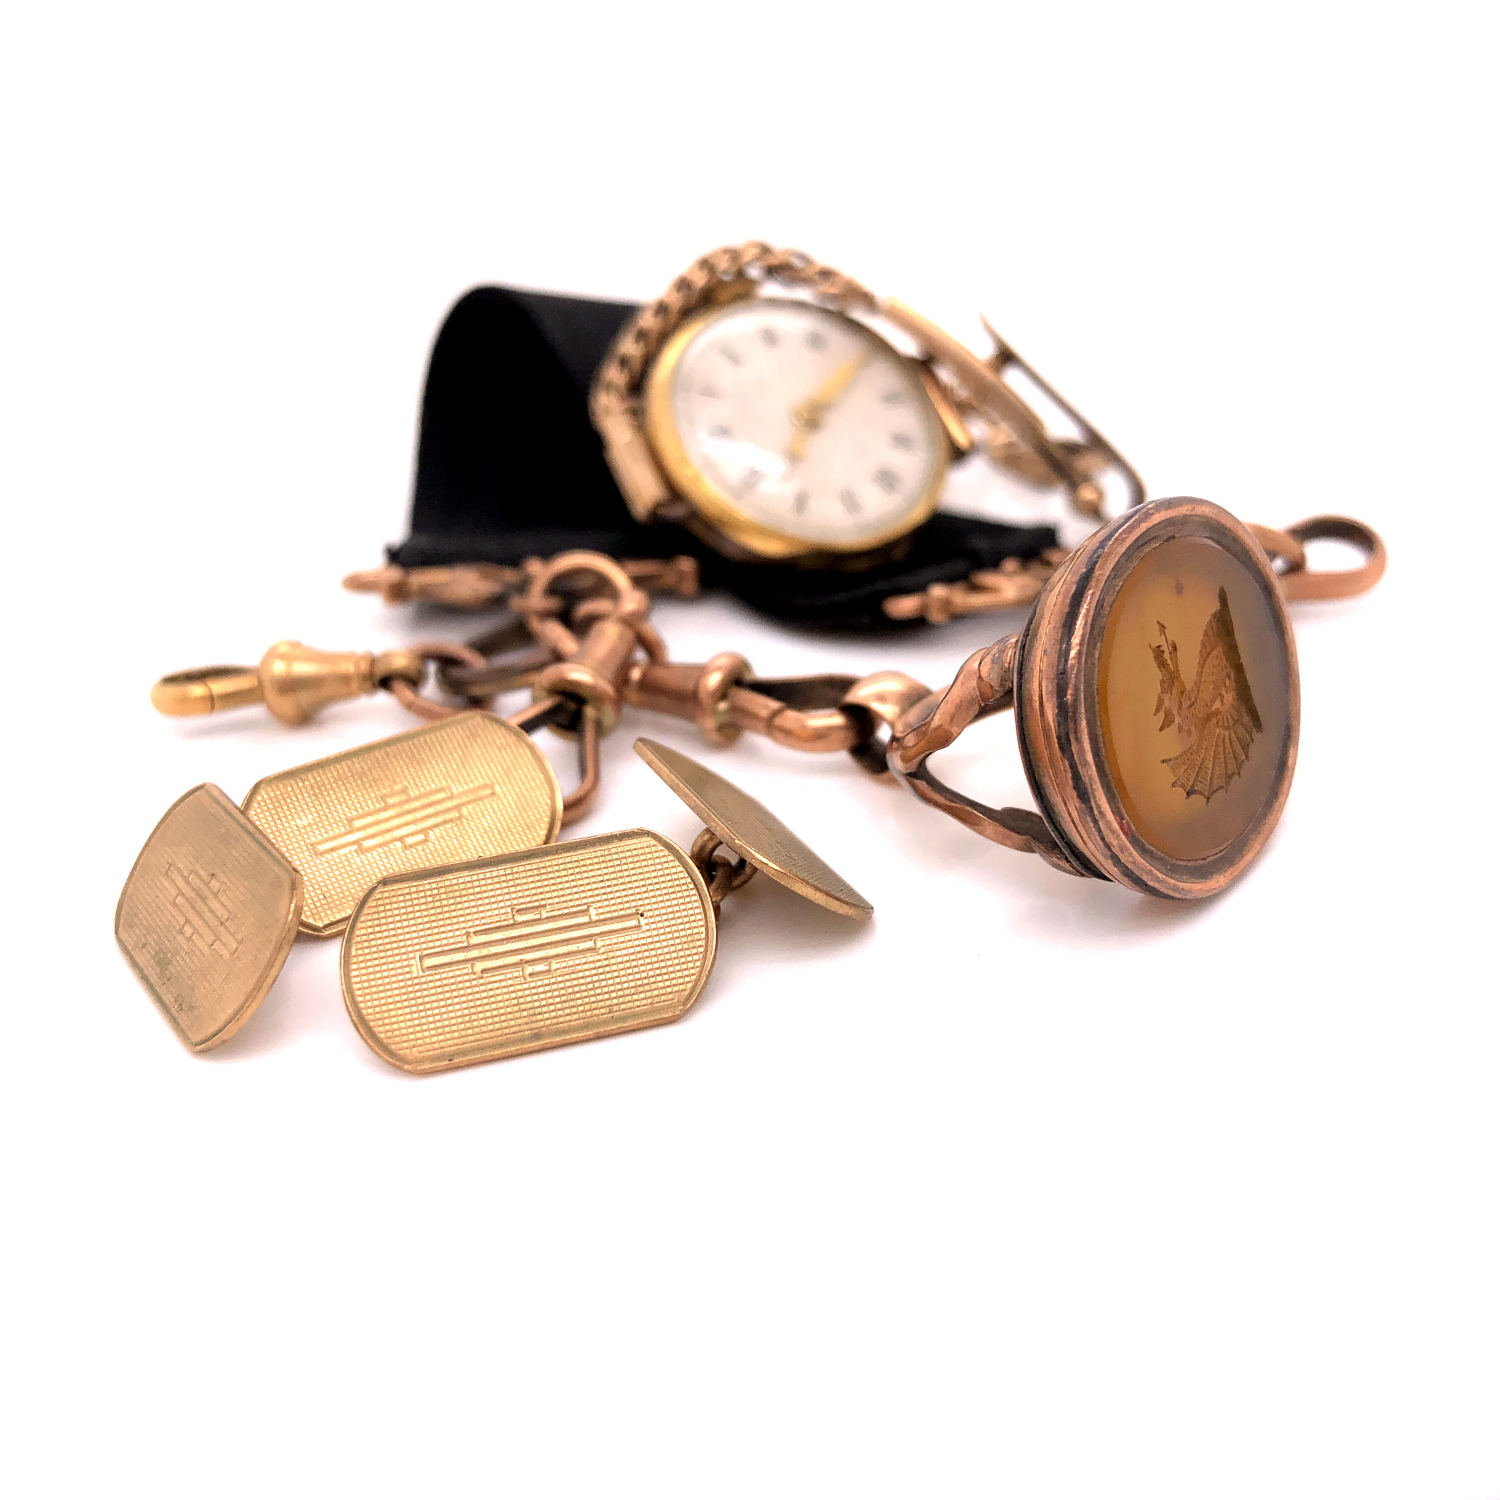 AN 18ct GOLD COCKTAIL WATCH FITTED WITH A 9ct GOLD BRACELET STRAP, A PAIR OF 9ct GOLD CUFFLINKS,